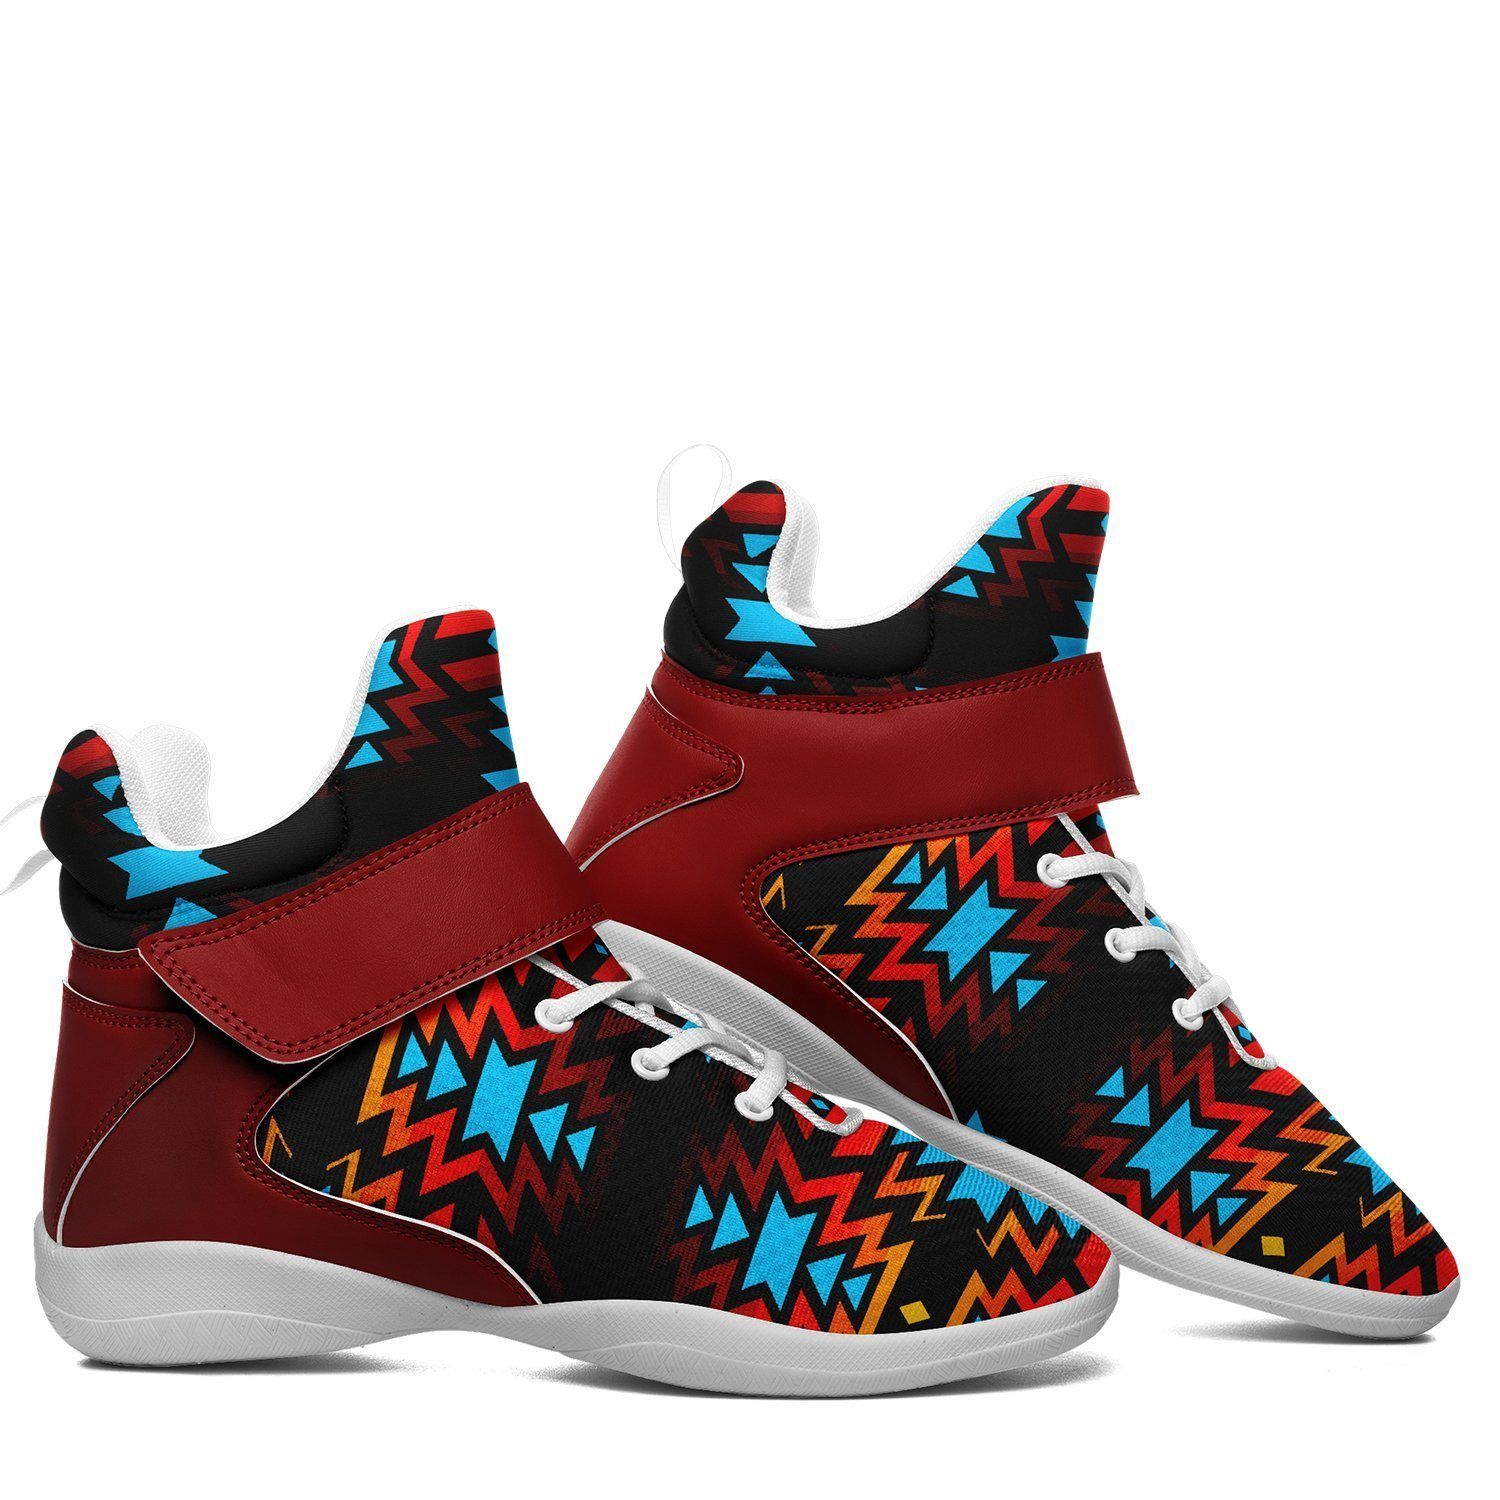 Black Fire and Turquoise Kid's Ipottaa Basketball / Sport High Top Shoes 49 Dzine 